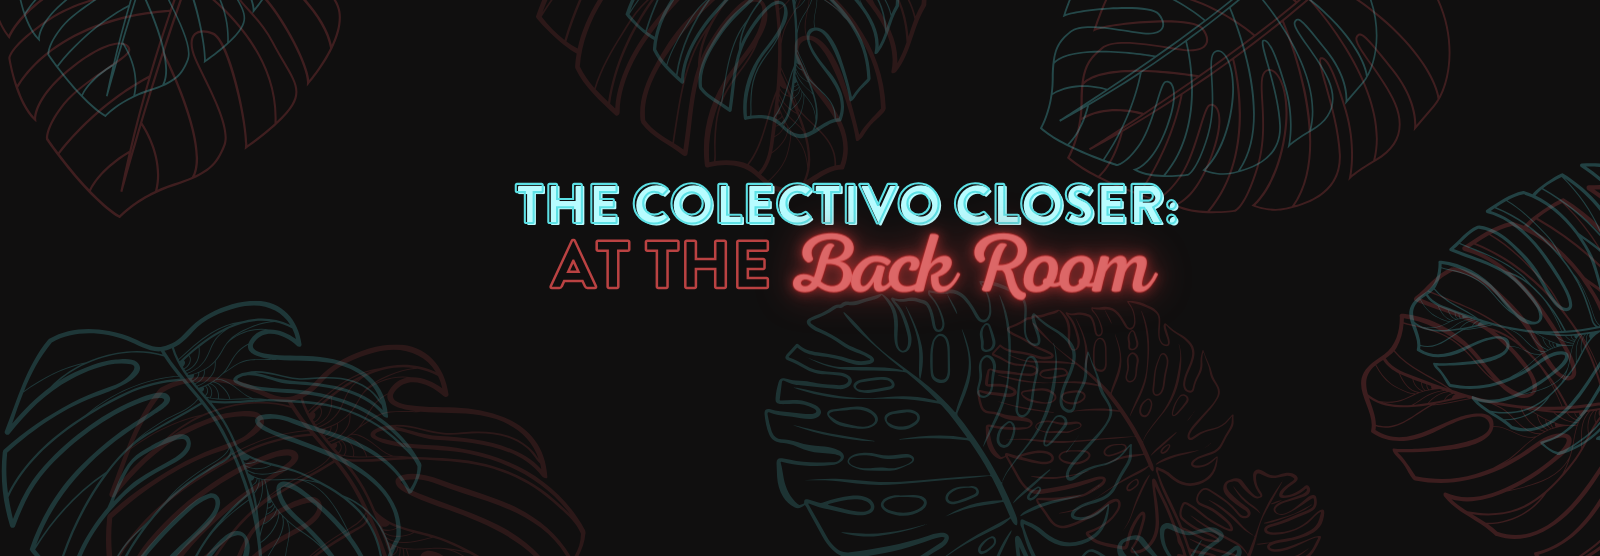 The Colectivo Closer: At The Back Room